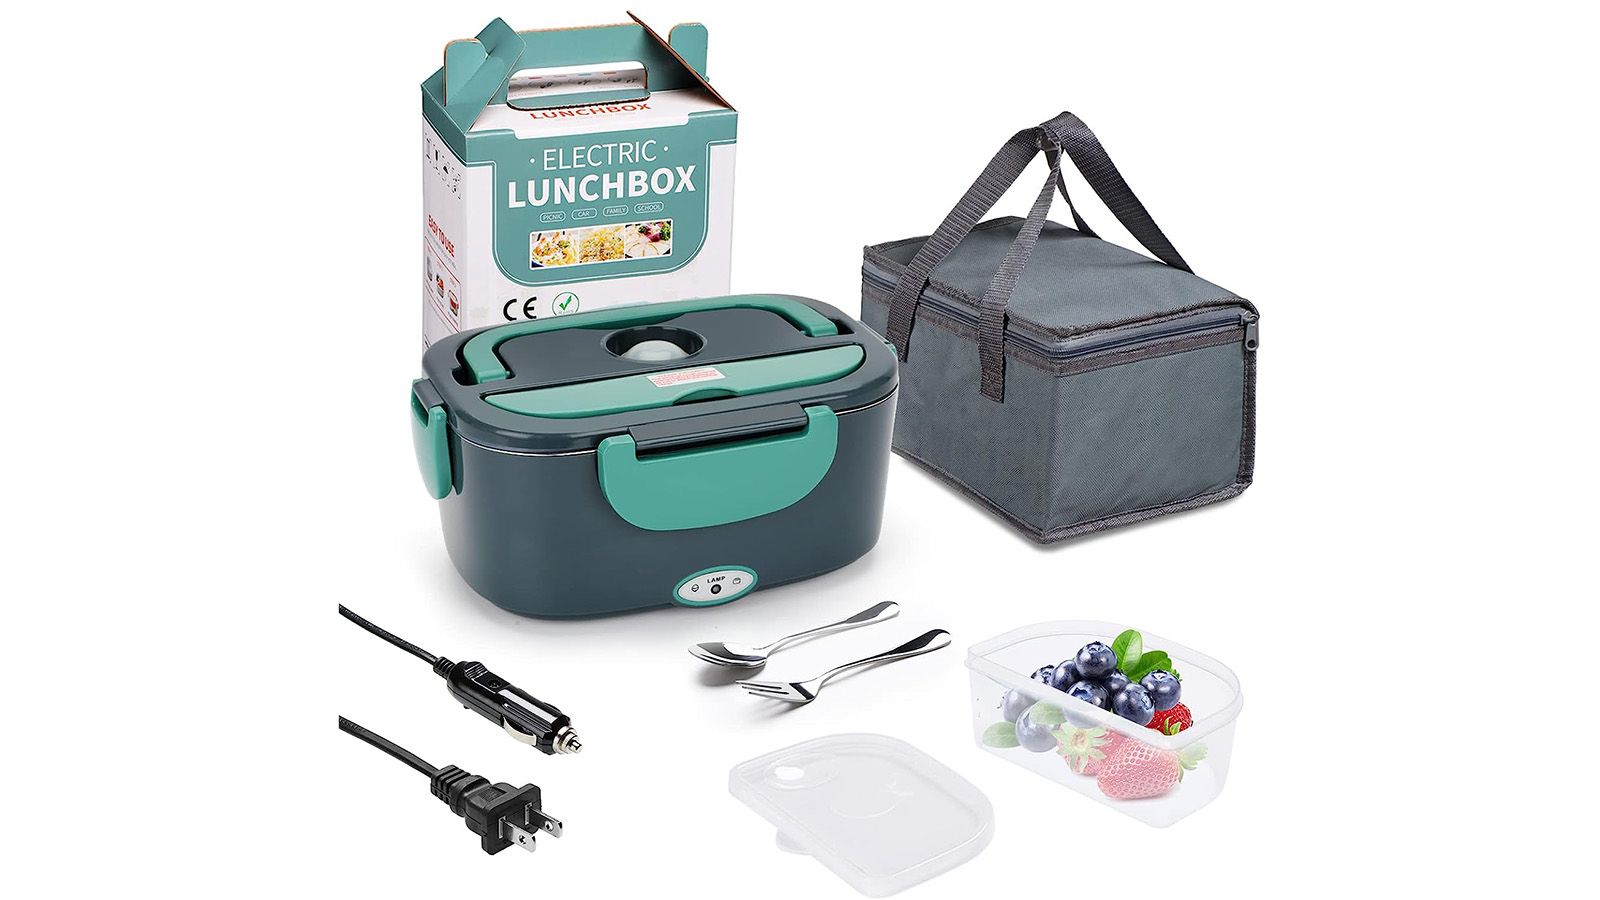 Heated Lunch Box – ReliantEMS Corp